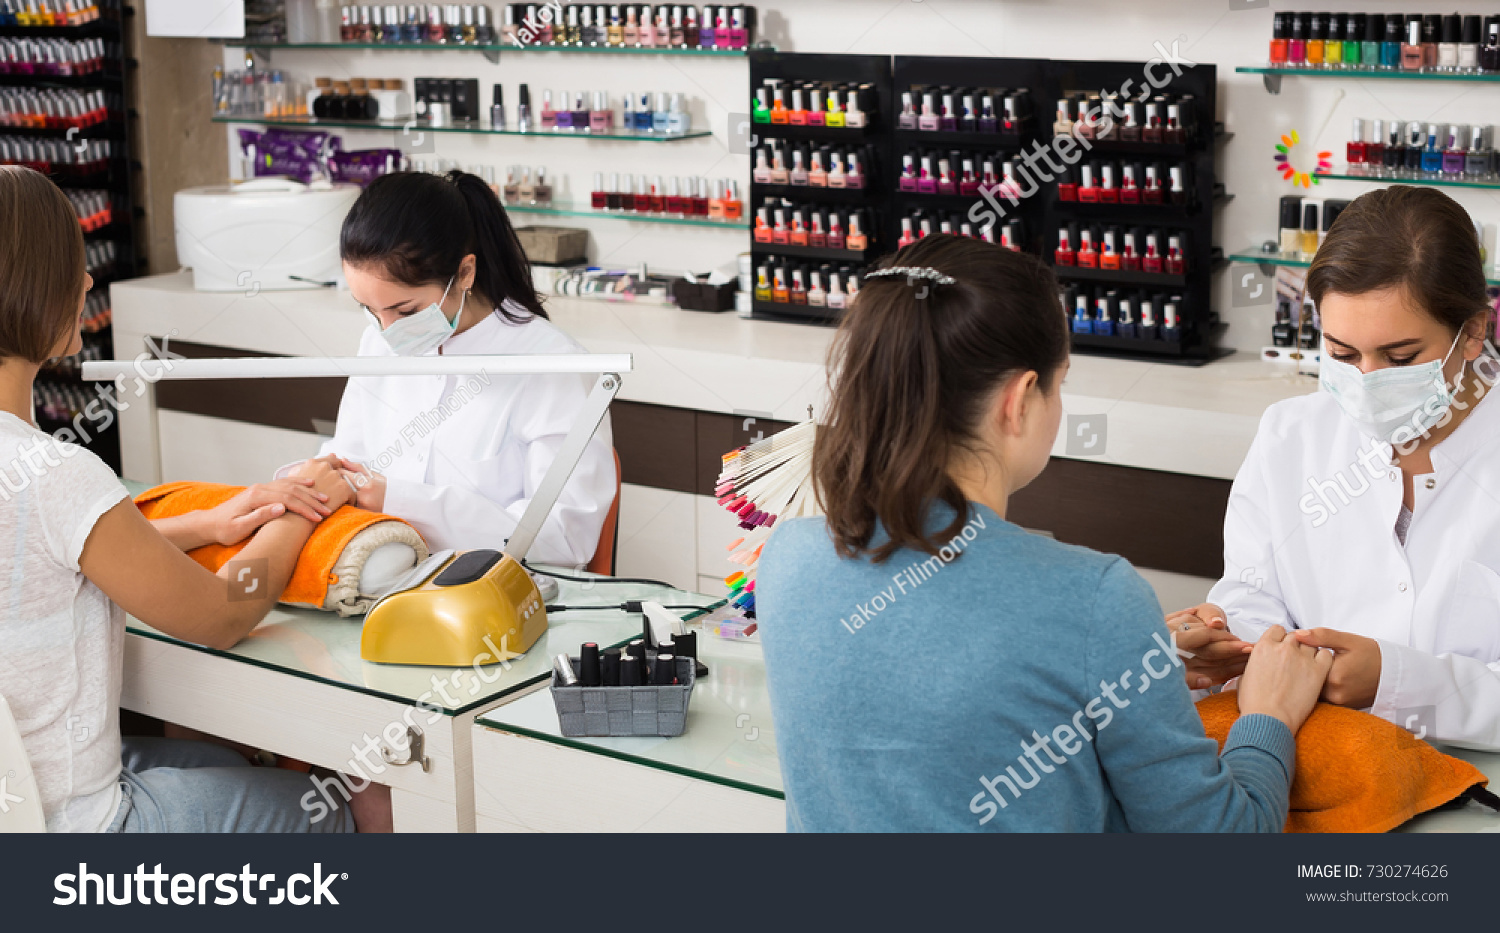 Happy american women getting their nails done at beauty salon #730274626